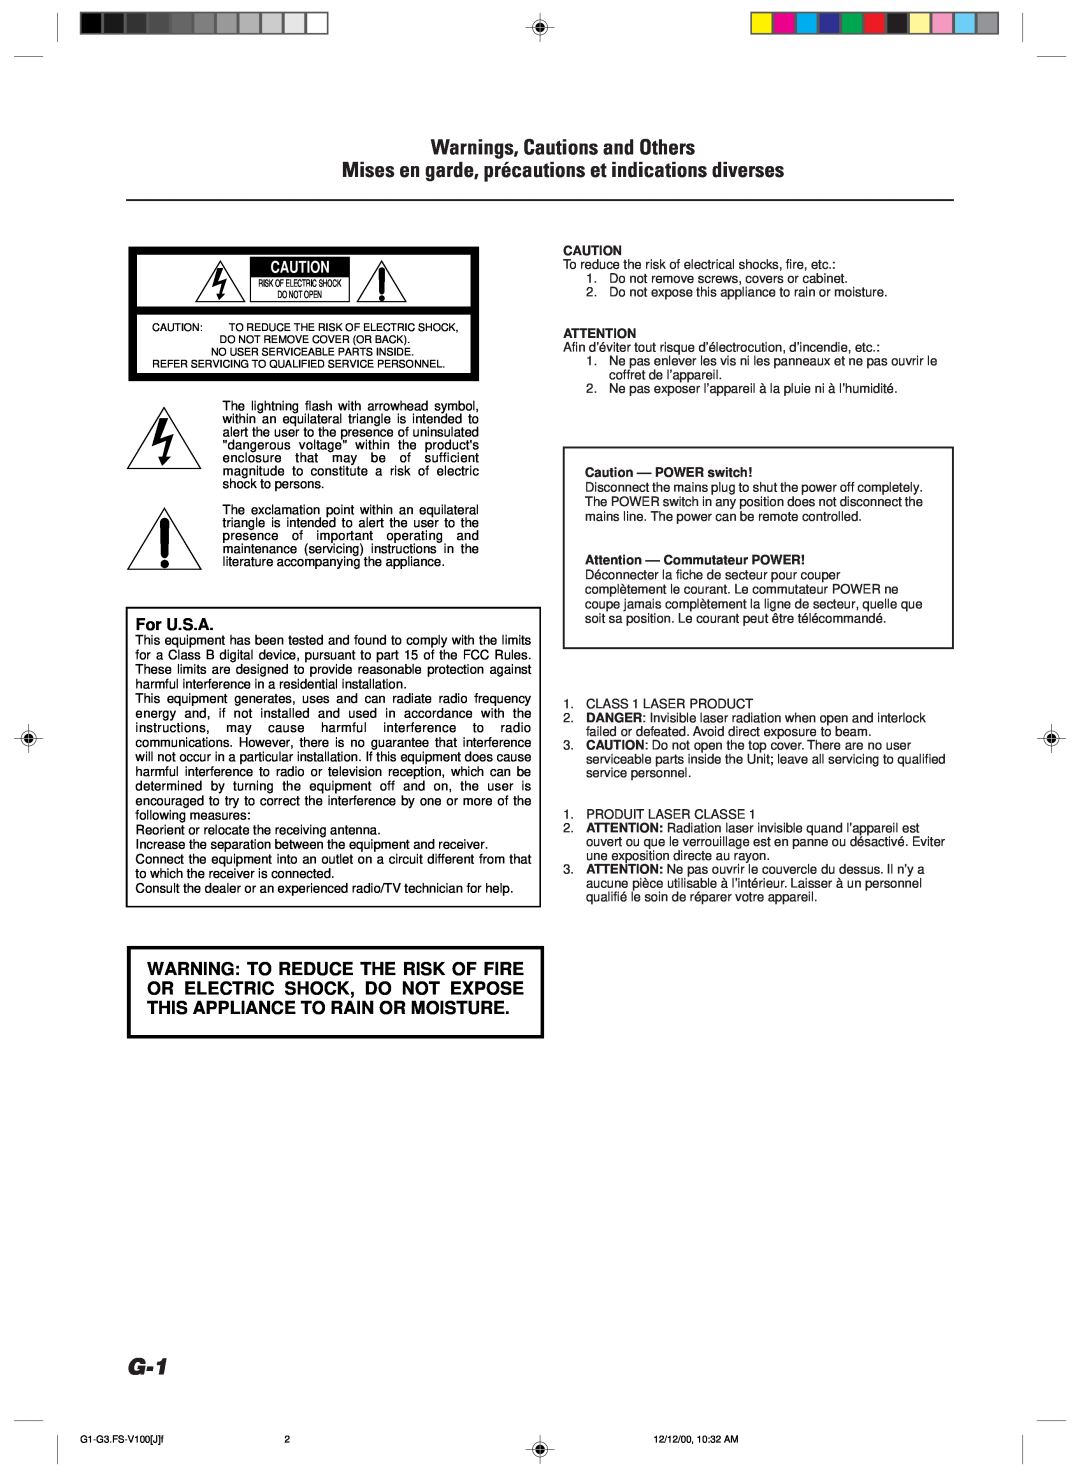 JVC FS-V100 manual For U.S.A, Warnings, Cautions and Others, Caution ––POWER switch, Attention ––Commutateur POWER 